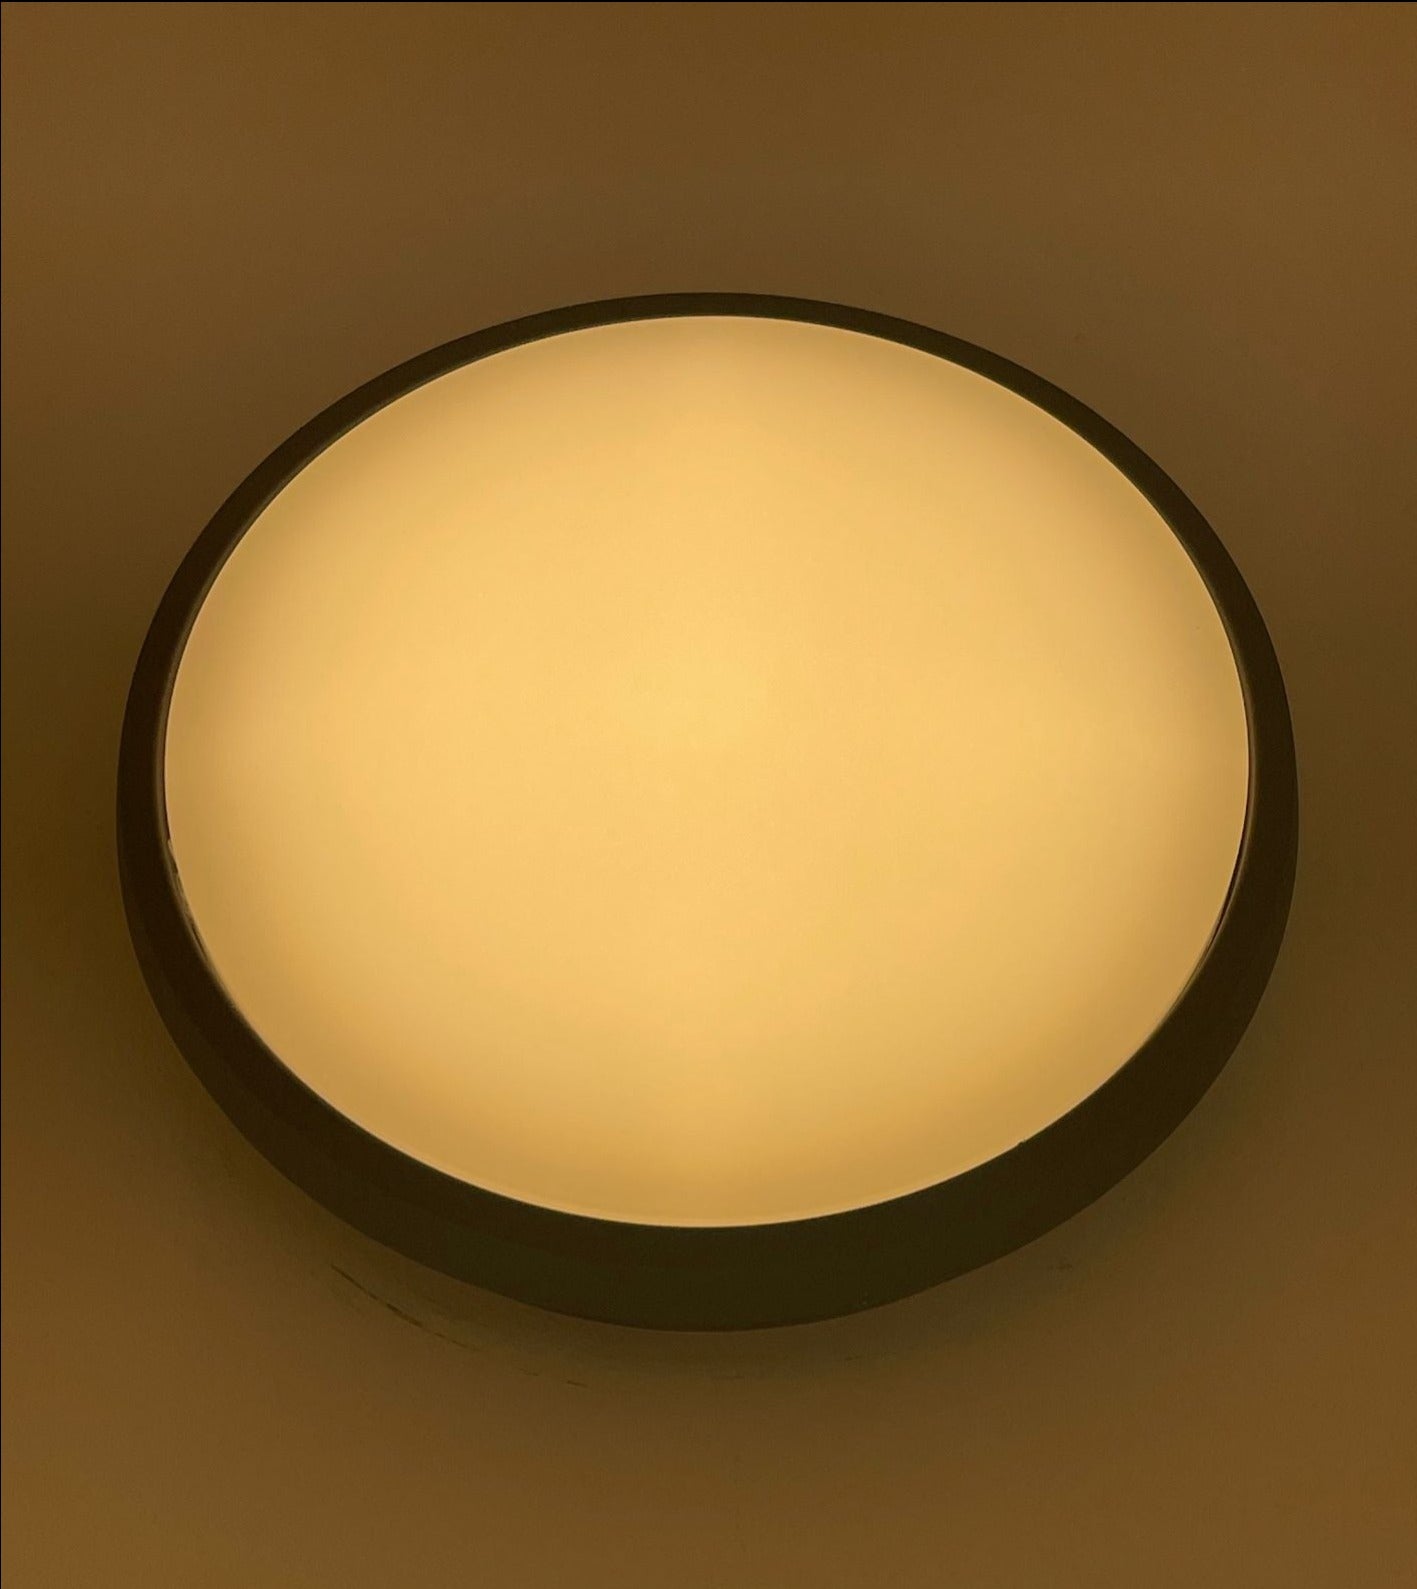 Round, dome shaped light that emits a soft and warm light